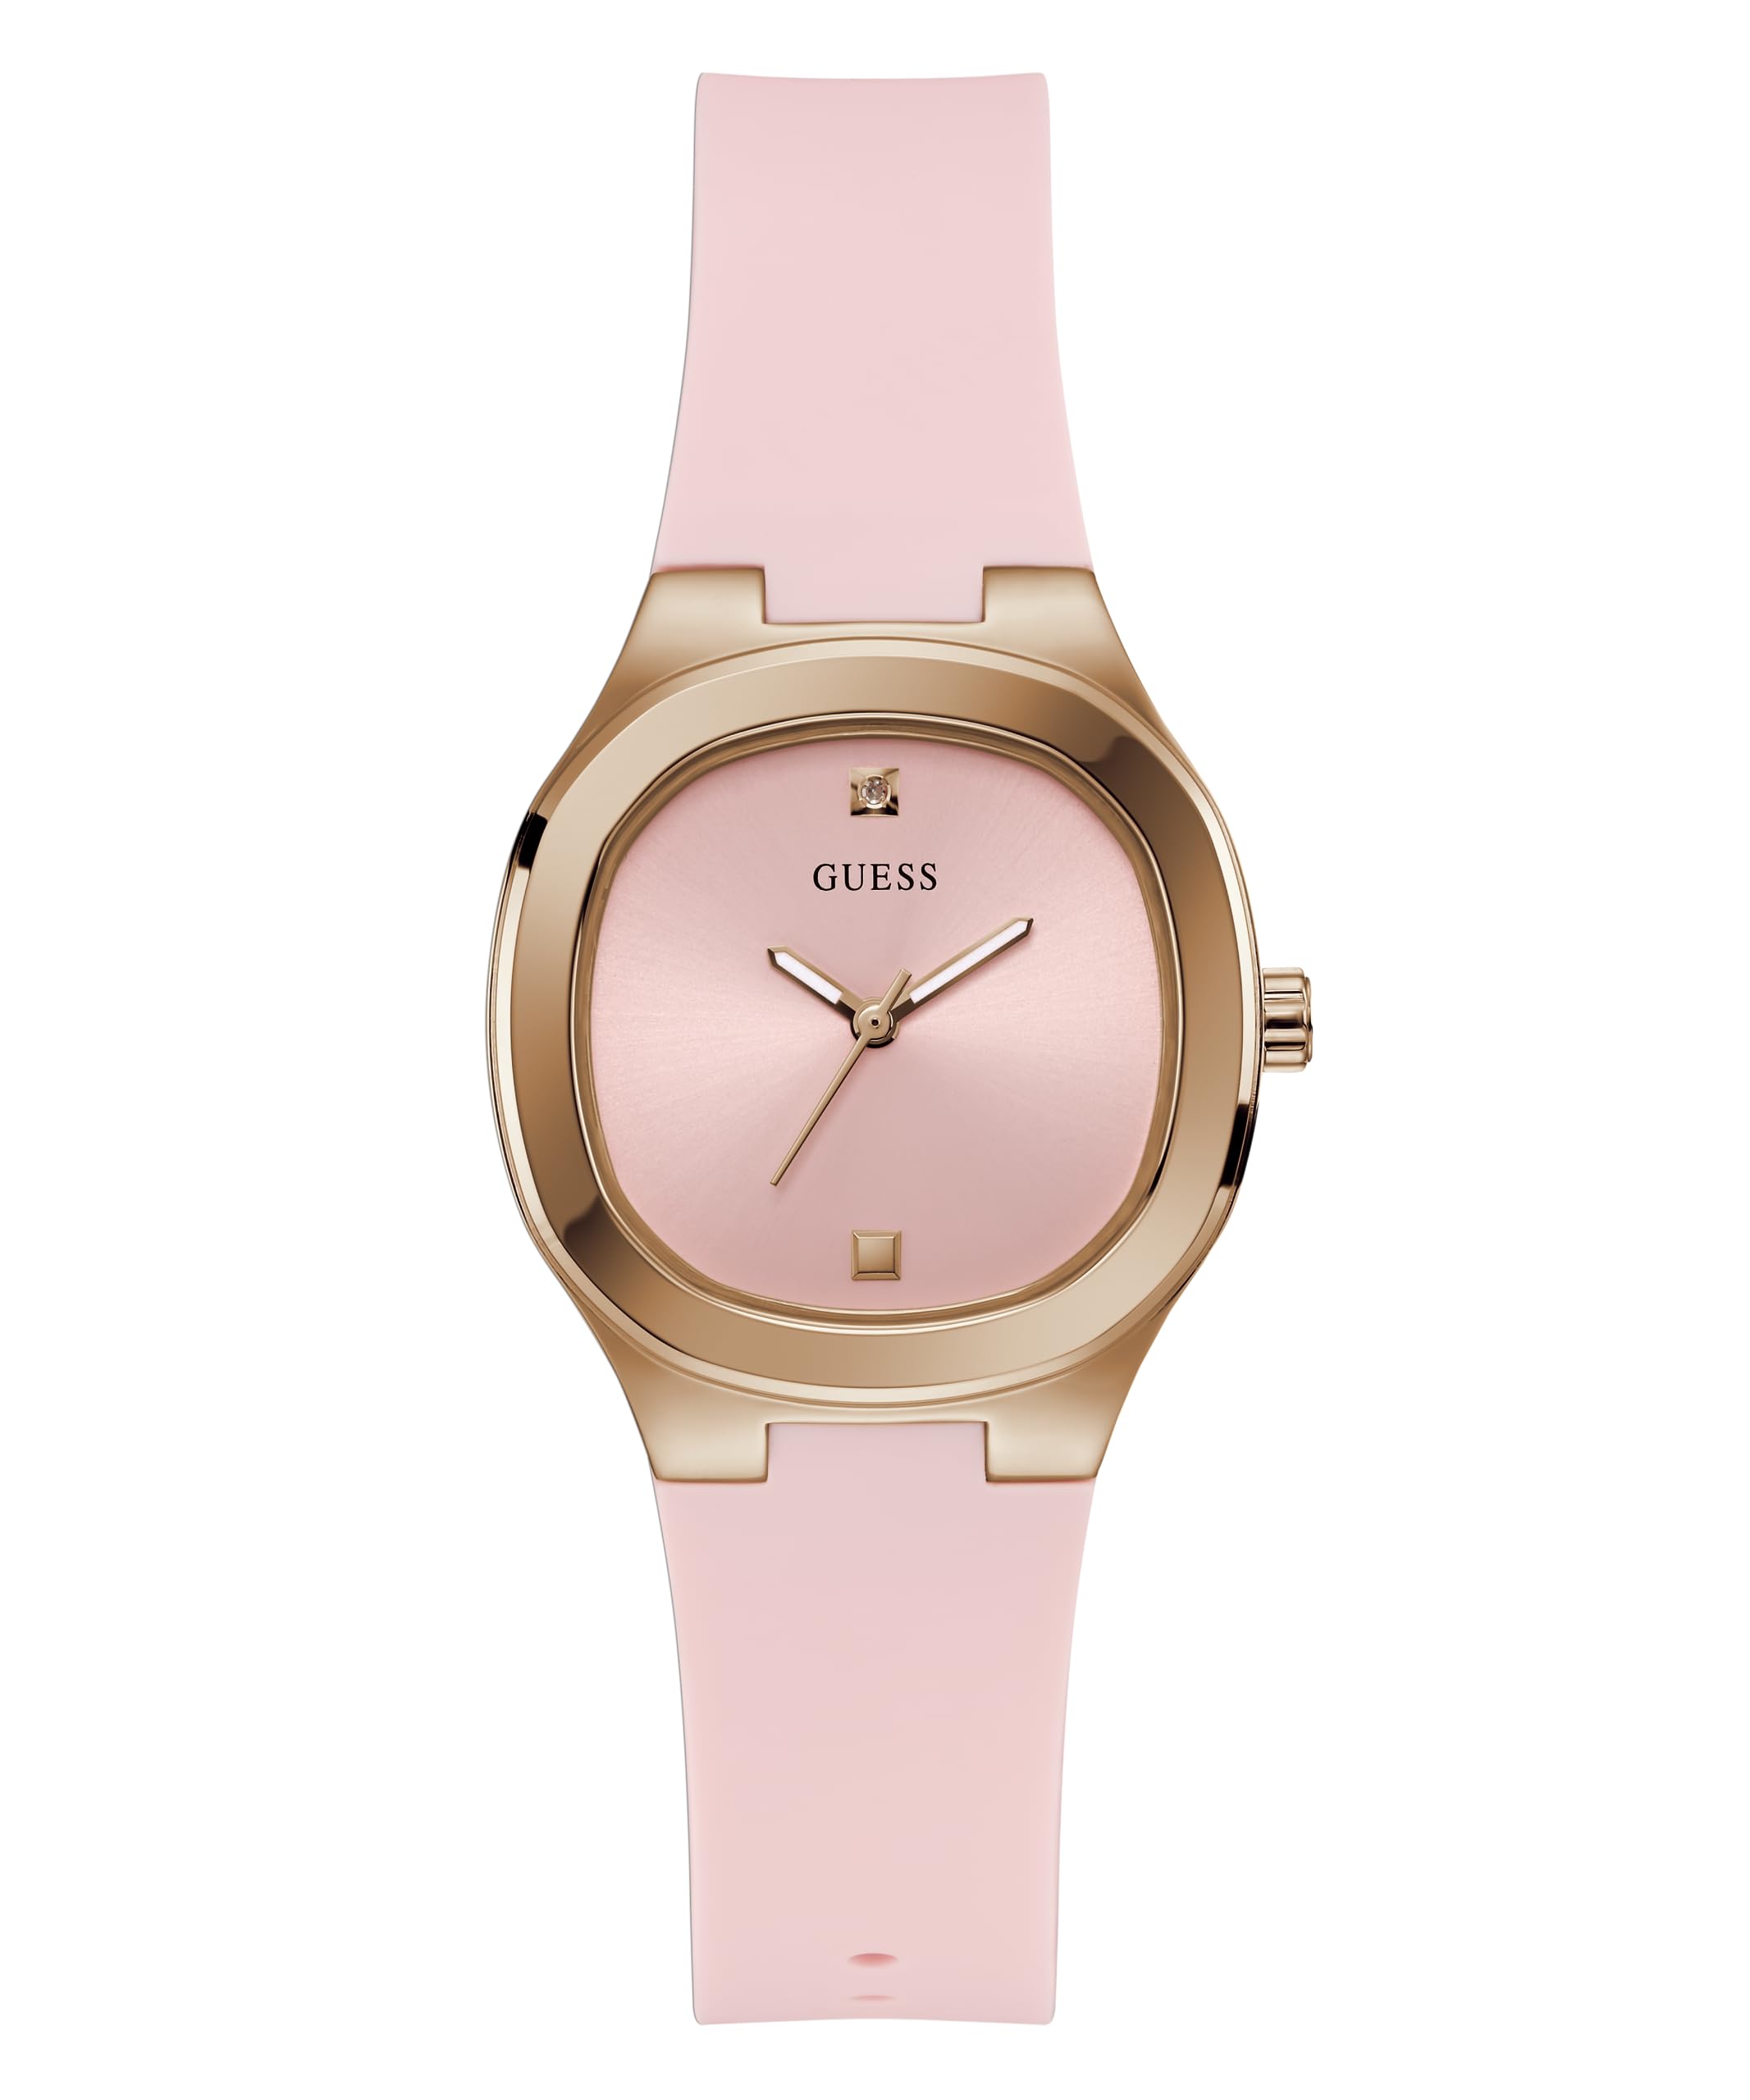 GUESS Women's 32mm Watch - Pink Strap Pink Dial Rose Gold Tone Case